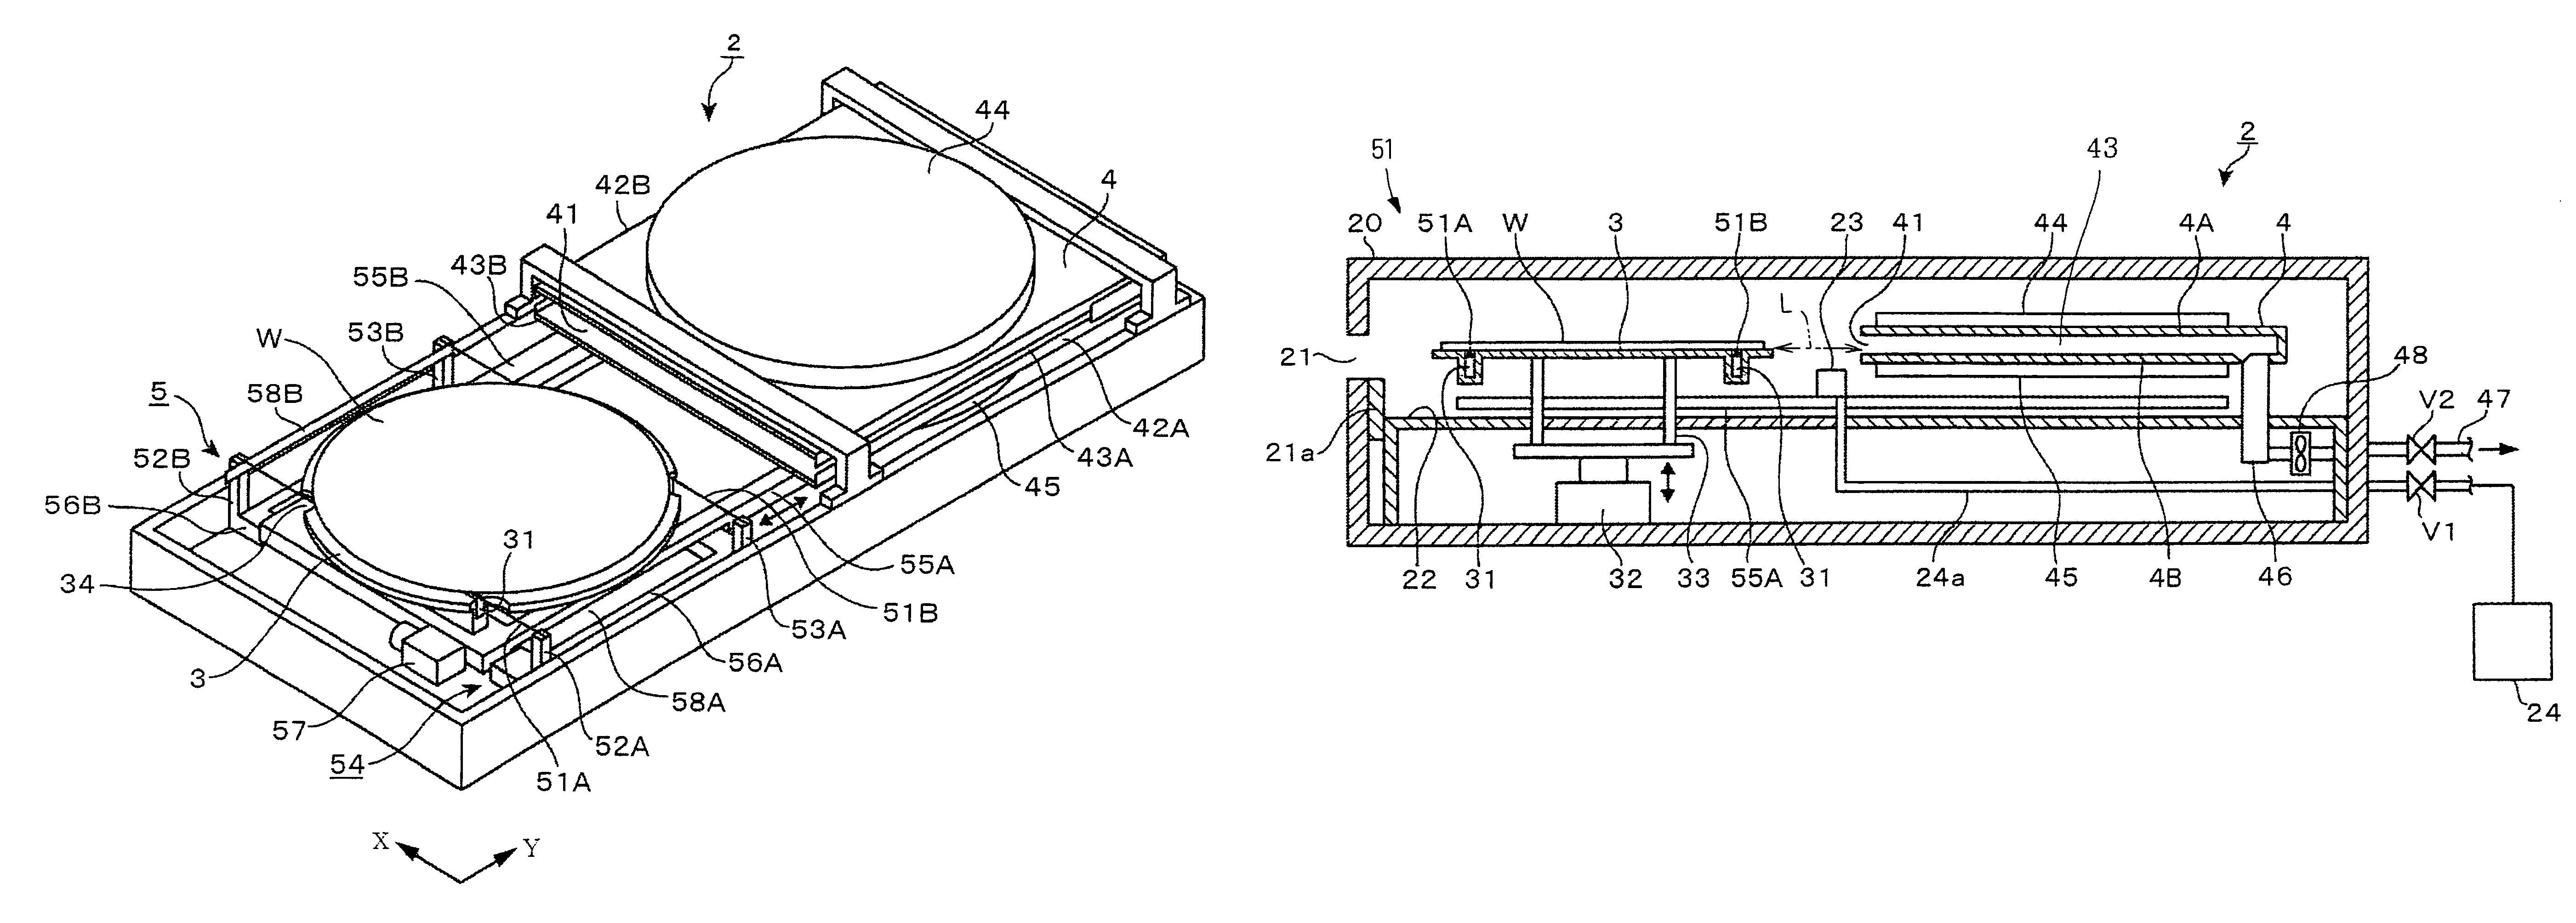 Heating apparatus, and coating and developing apparatus